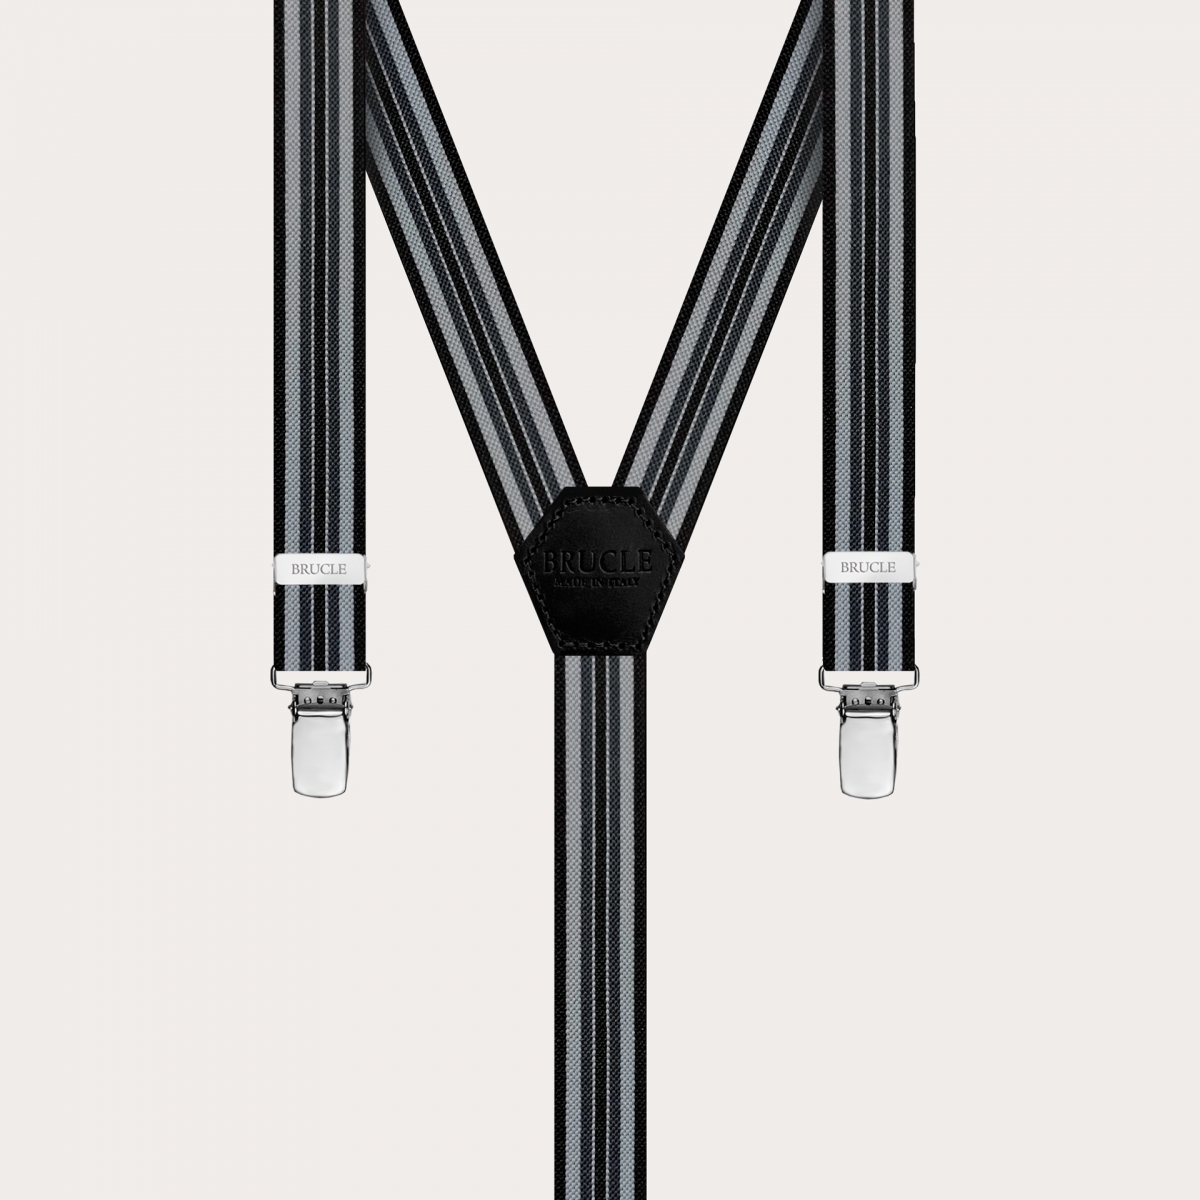 BRUCLE Thin unisex suspenders, black and grey